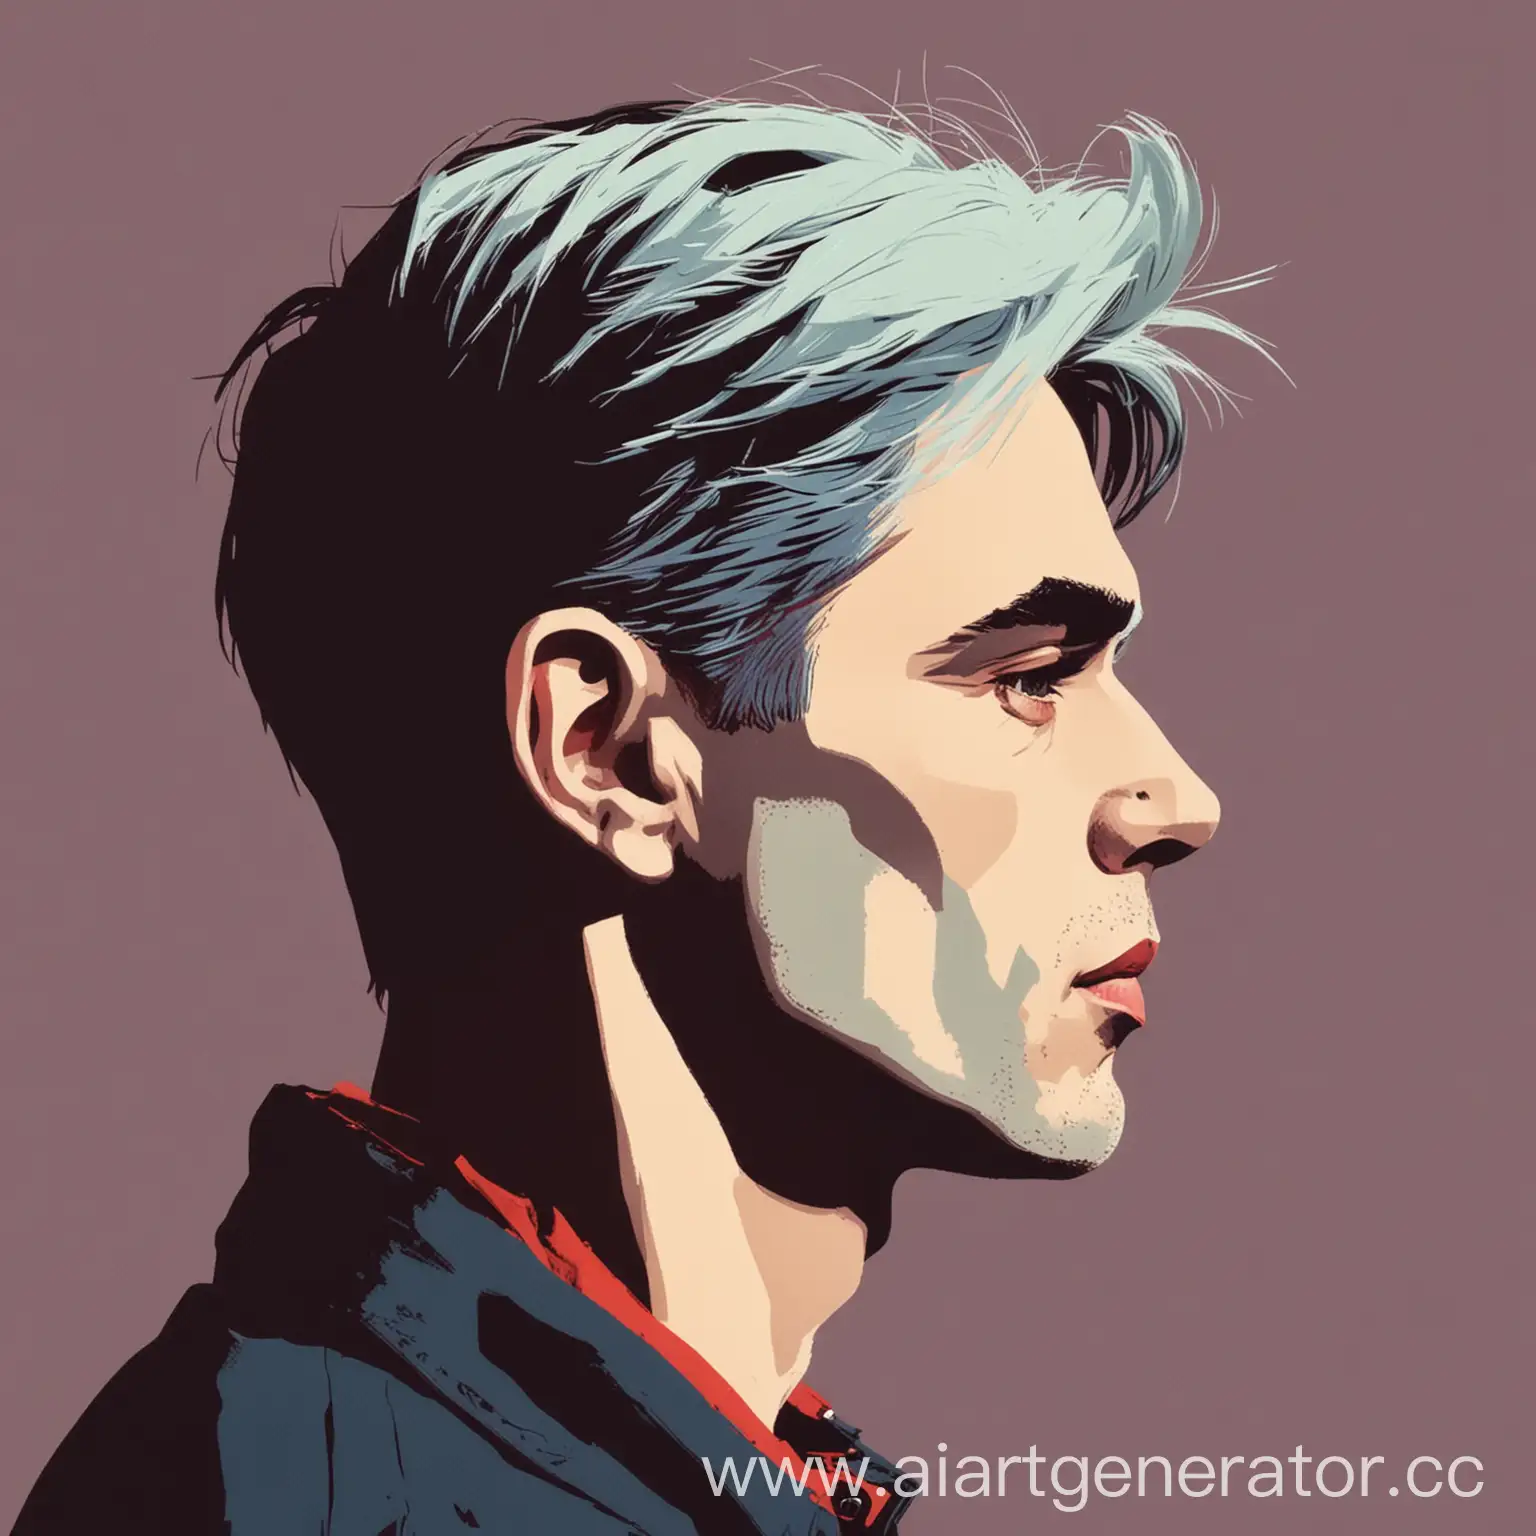 Colorful-Flat-Male-Profile-Illustration-inspired-by-Andy-Warhol